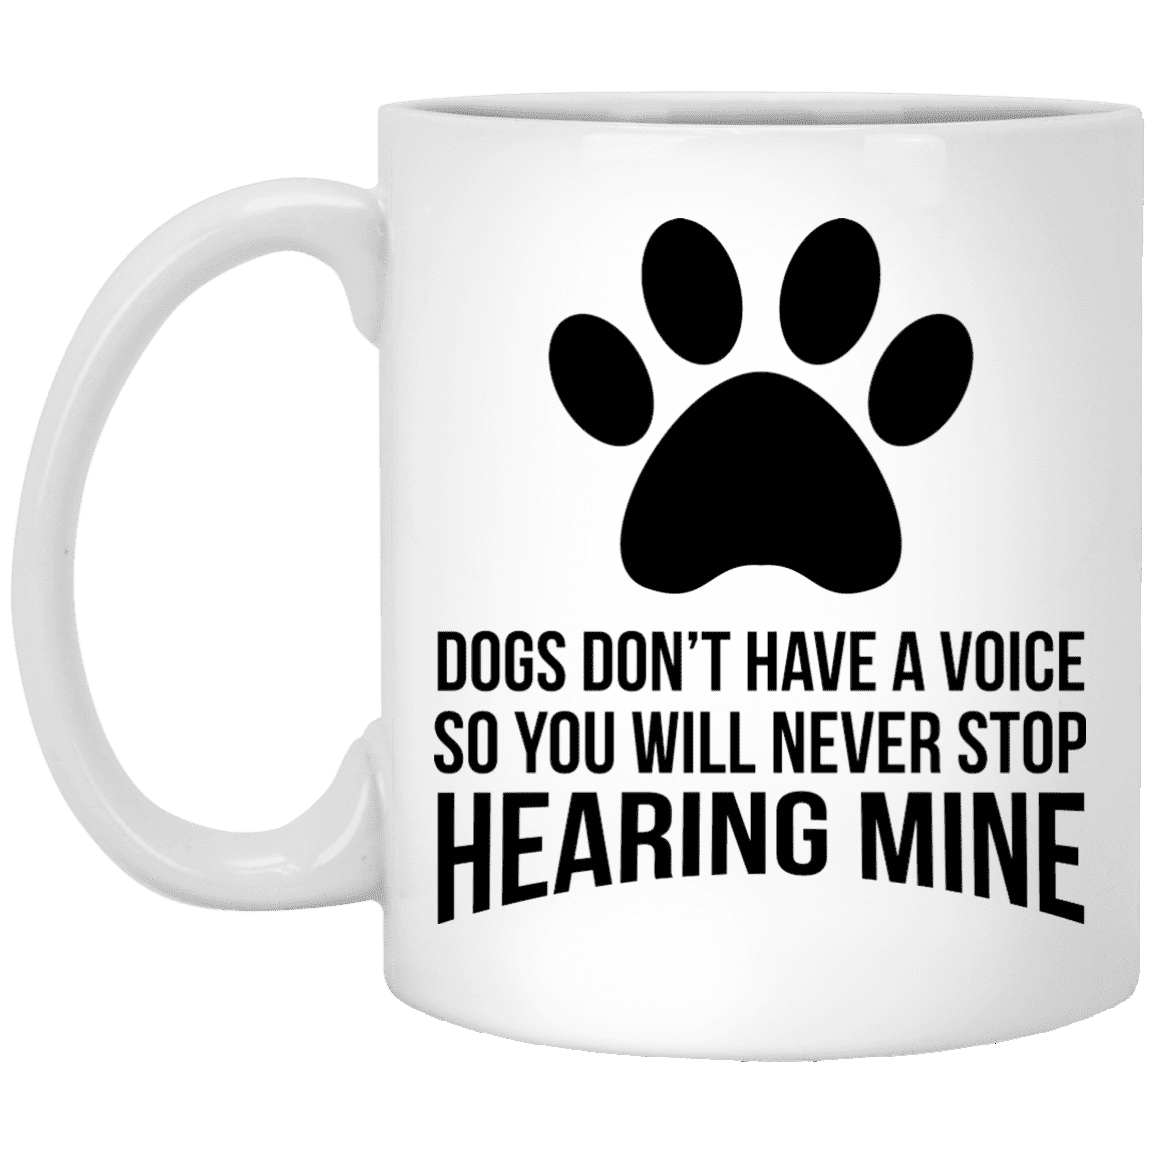 Dogs Don't Have a Voice - Mugs.